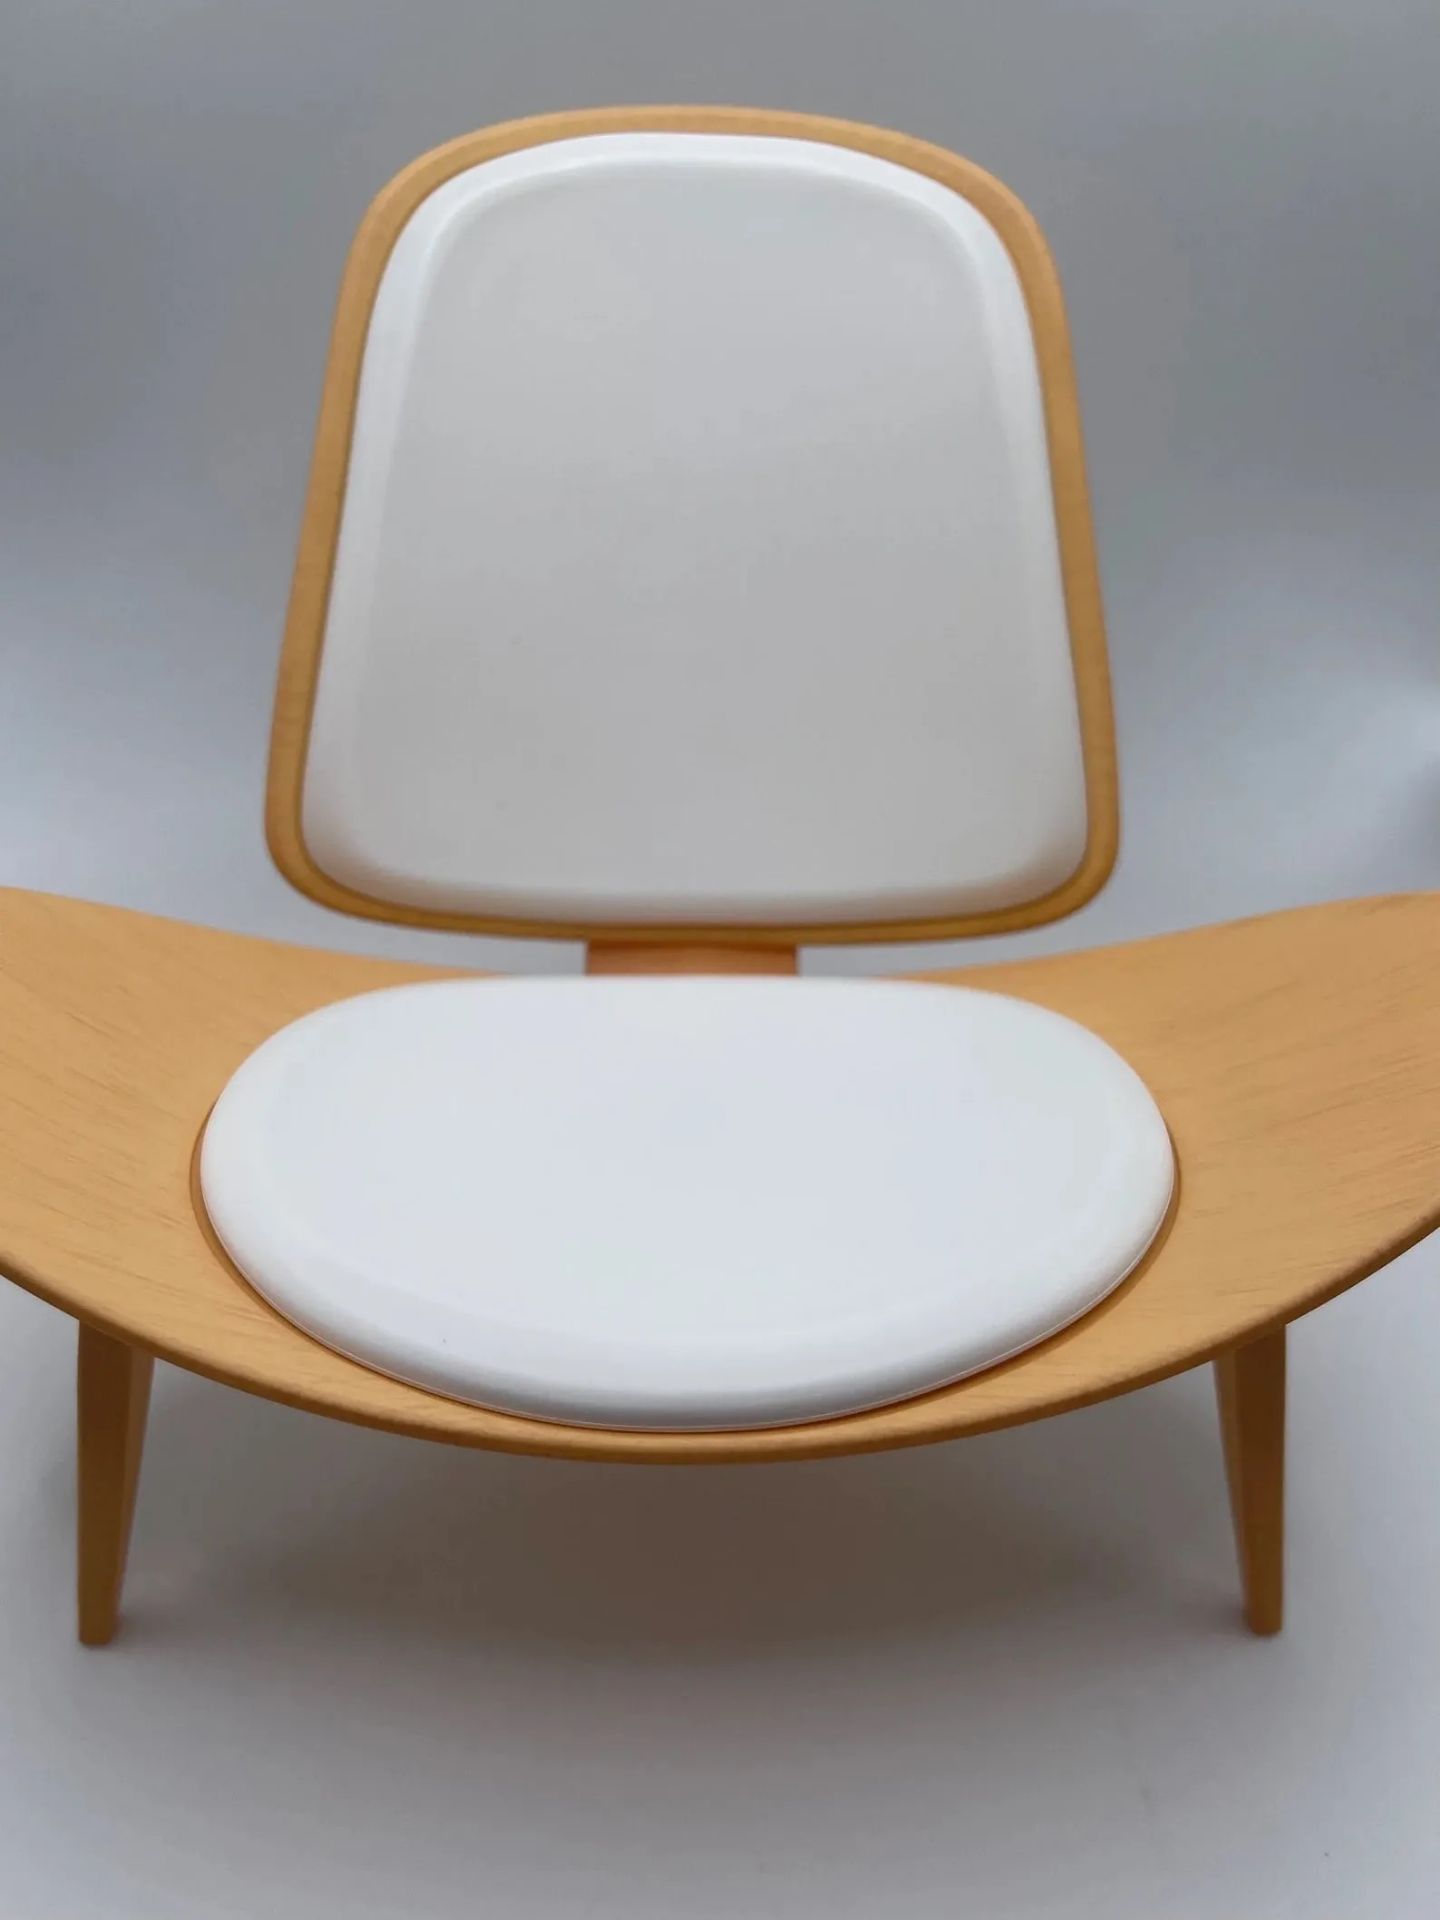 Three Hans Wegner Shell Chairs, Scale Model Desk Displays - Image 5 of 8